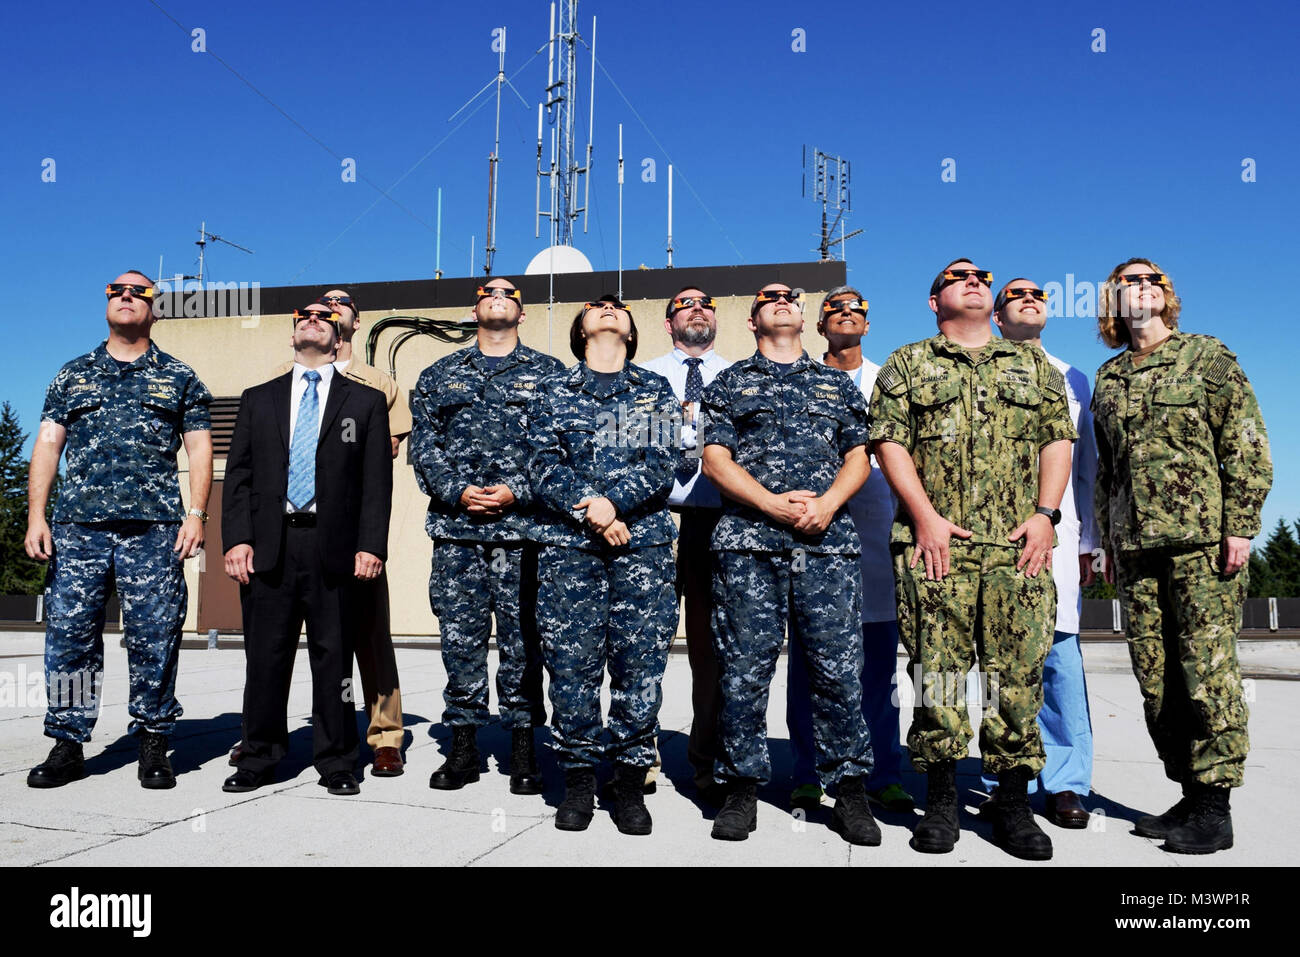 Naval Hospital Bremerton (NHB) Executive Board members take a moment - at 10:22 Pacific Standard Time - to safely view the long-anticipated solar eclipse atop their facility on August 21, 2017. The partial eclipse began around 9:10 a.m. and lasted until approximately 11:40 a.m. In the weeks leading up to the event, NHB's Ophthalmology/Eye Surgery Clinic had consistently reminded patients and staff to remember to not directly look at the eclipse without proper eye protection - not even for a few seconds - due to the concern about temporary and sometimes permanent loss of vision that could occur Stock Photo